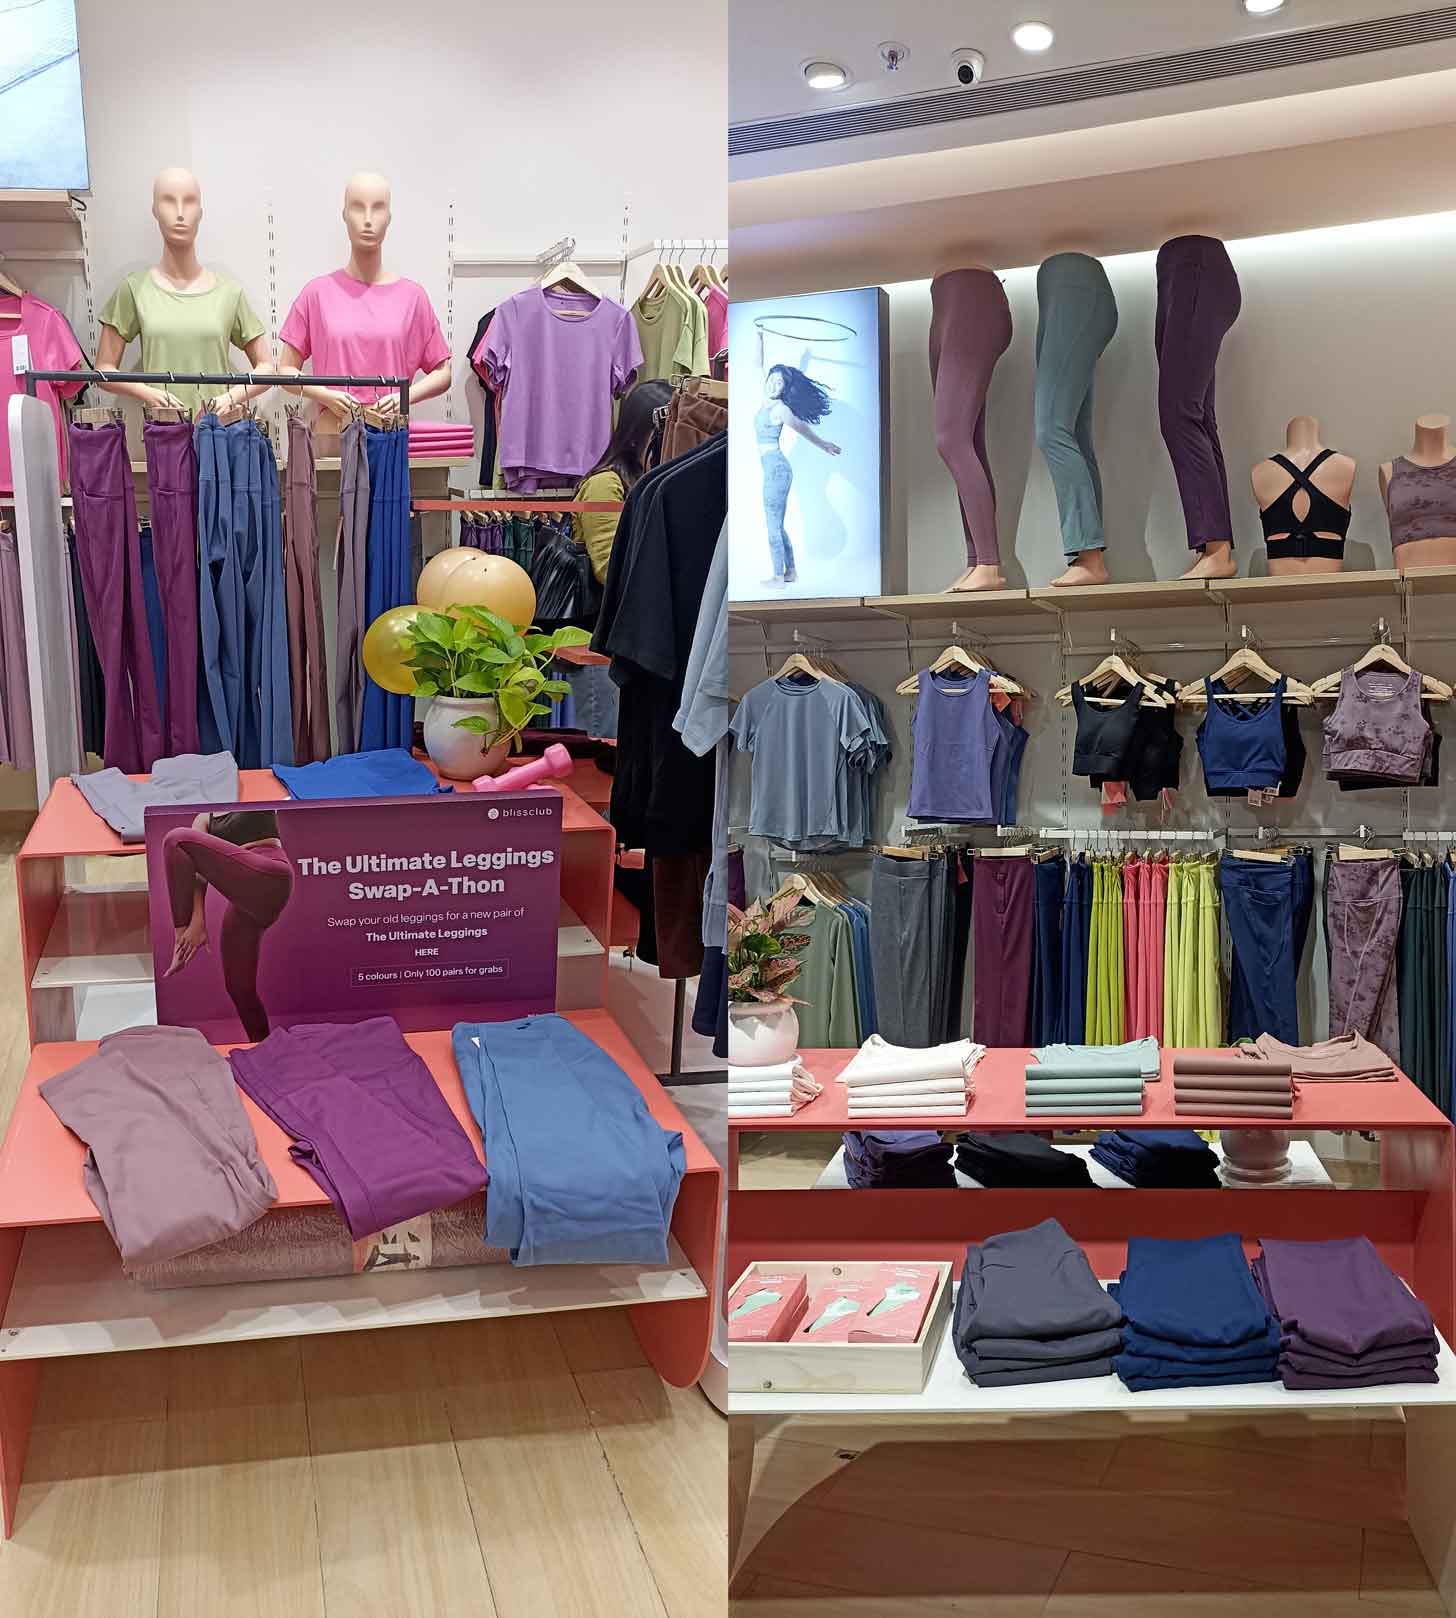 Blissclub launches new store in Mumbai, to focus on omnichannel drive